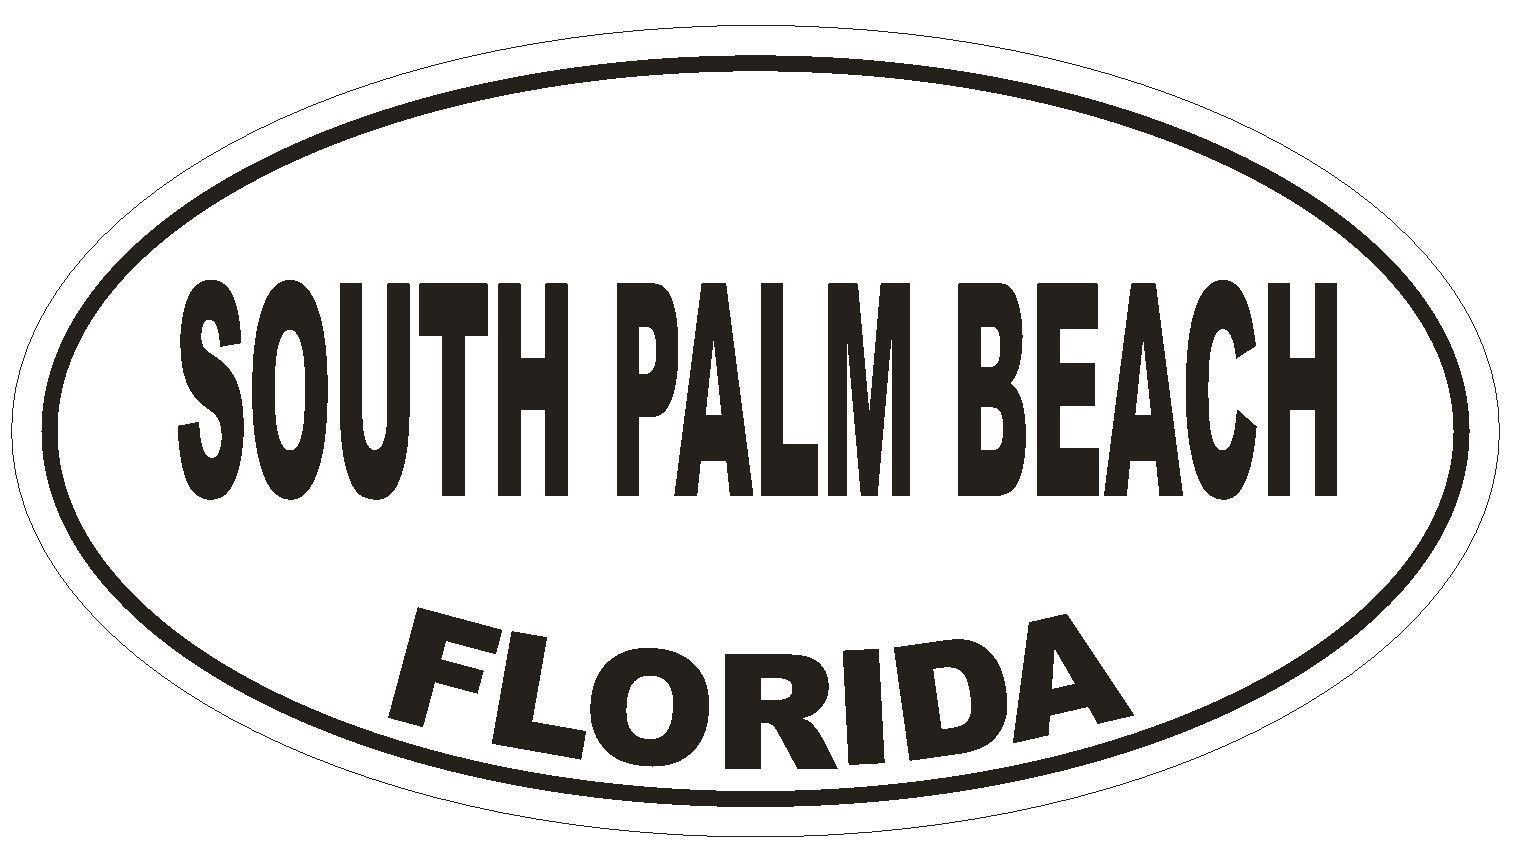 Primary image for South Palm Beach Florida Oval Bumper Sticker or Helmet Sticker D2707 Decal